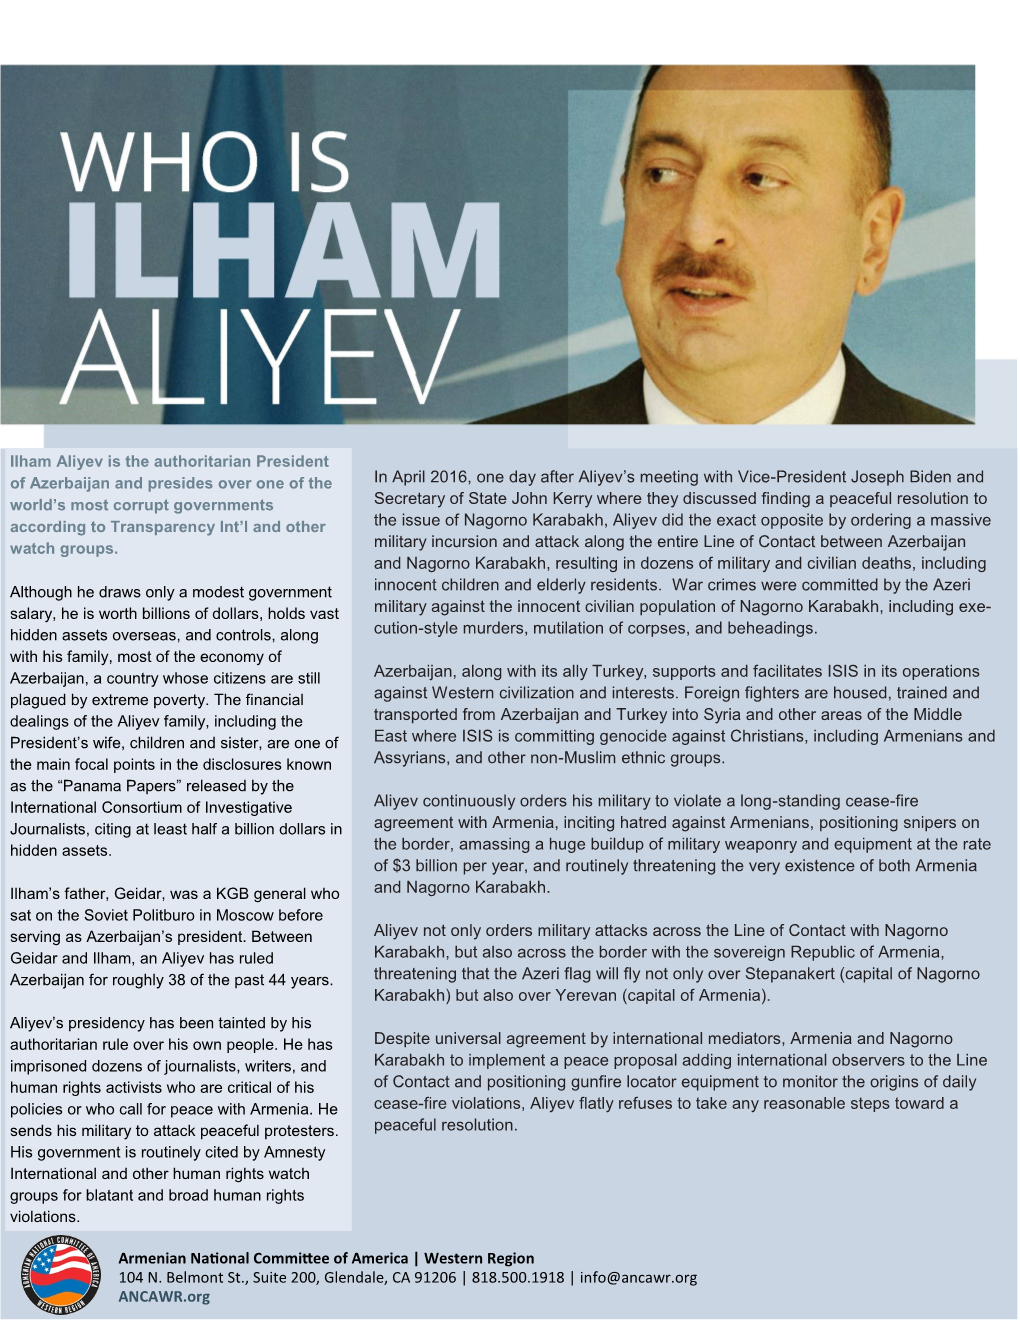 Ilham Aliyev Is the Authoritarian President of Azerbaijan and Presides Over One of the World's Most Corrupt Governments Accor